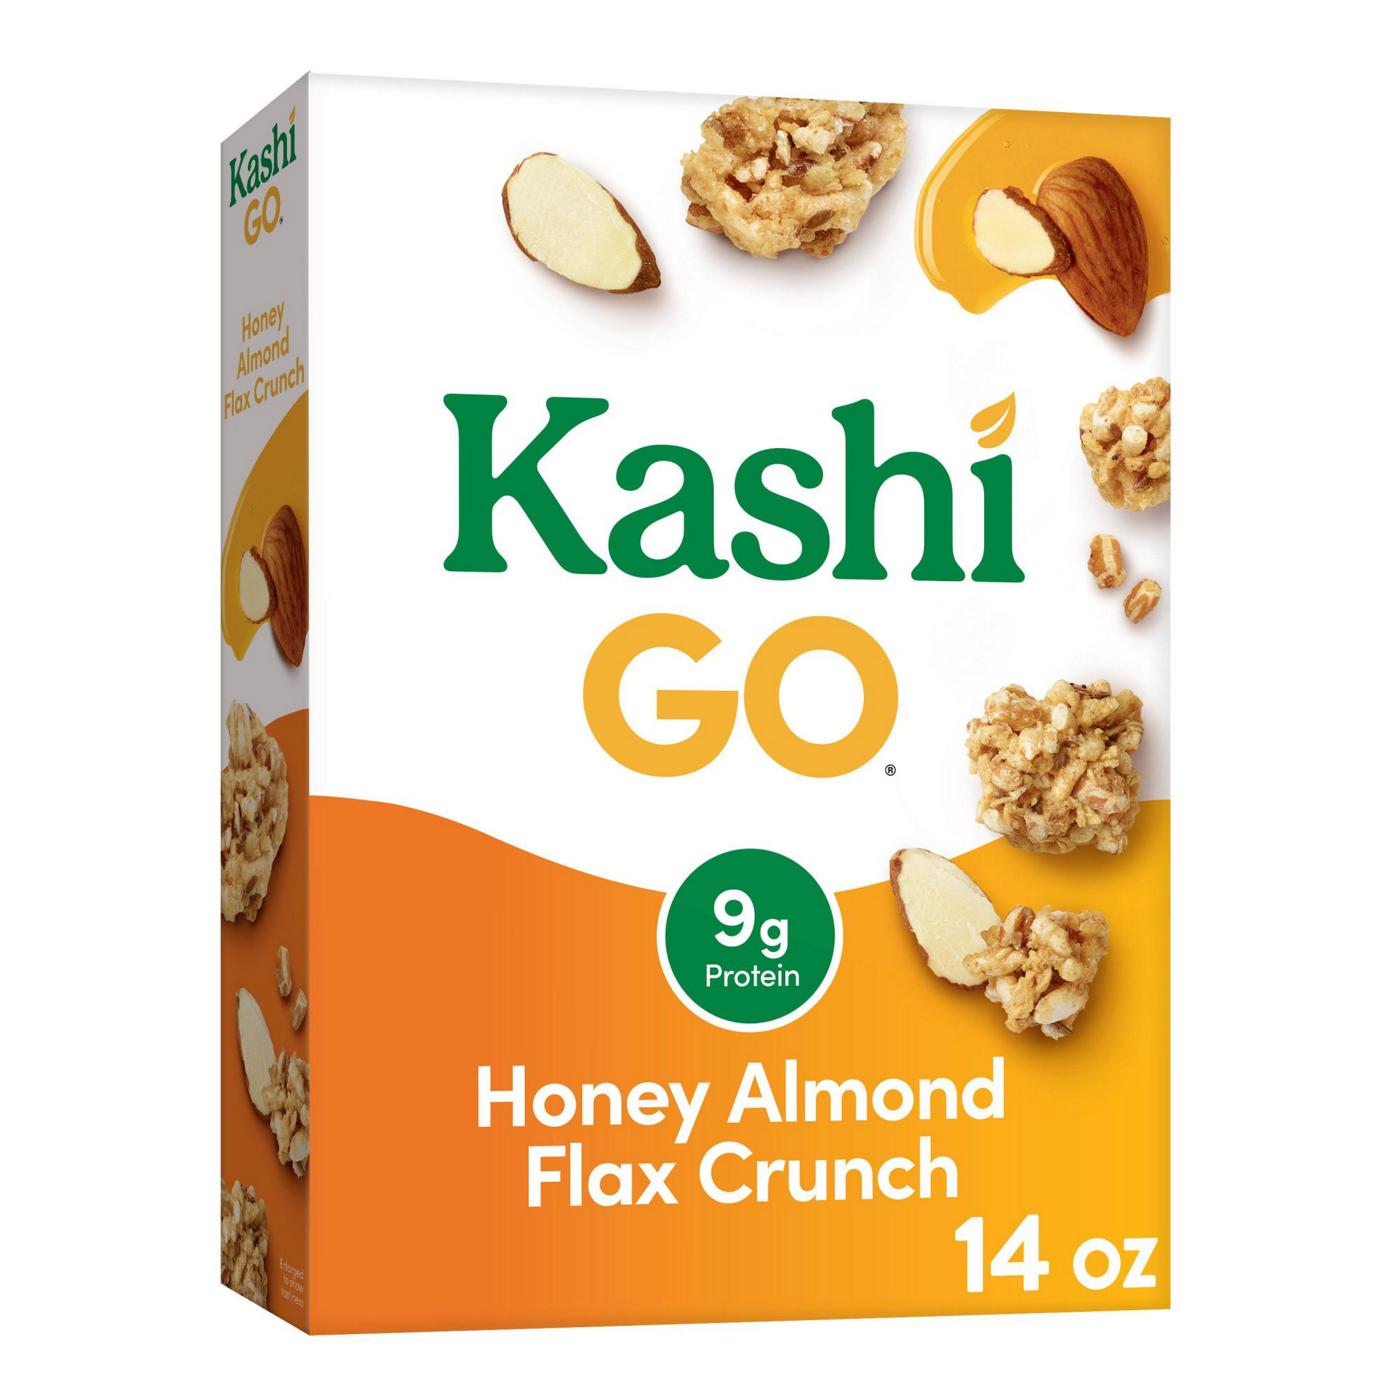 Kashi GO Honey Almond Flax Crunch Breakfast Cereal; image 8 of 11